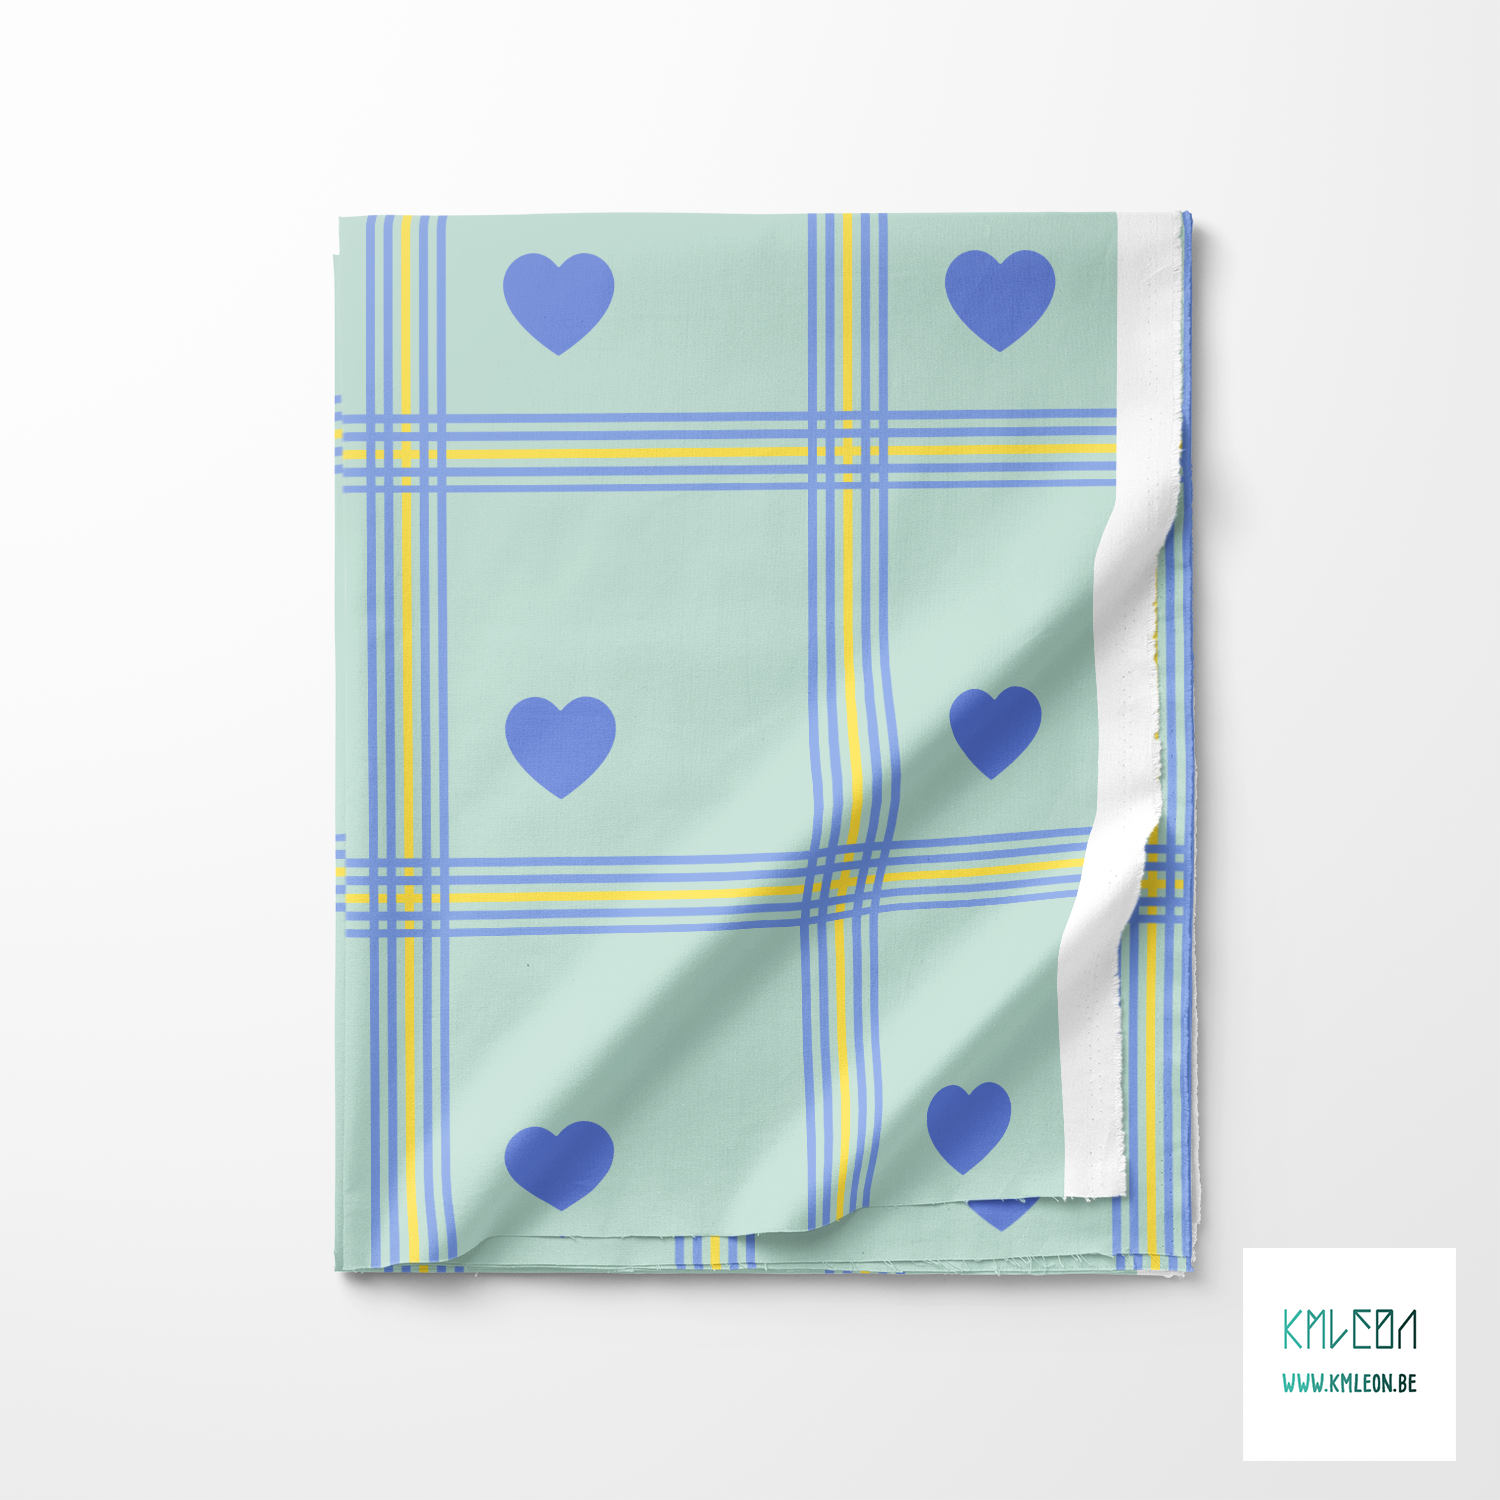 Yellow and periwinkle plaid with periwinkle hearts fabric